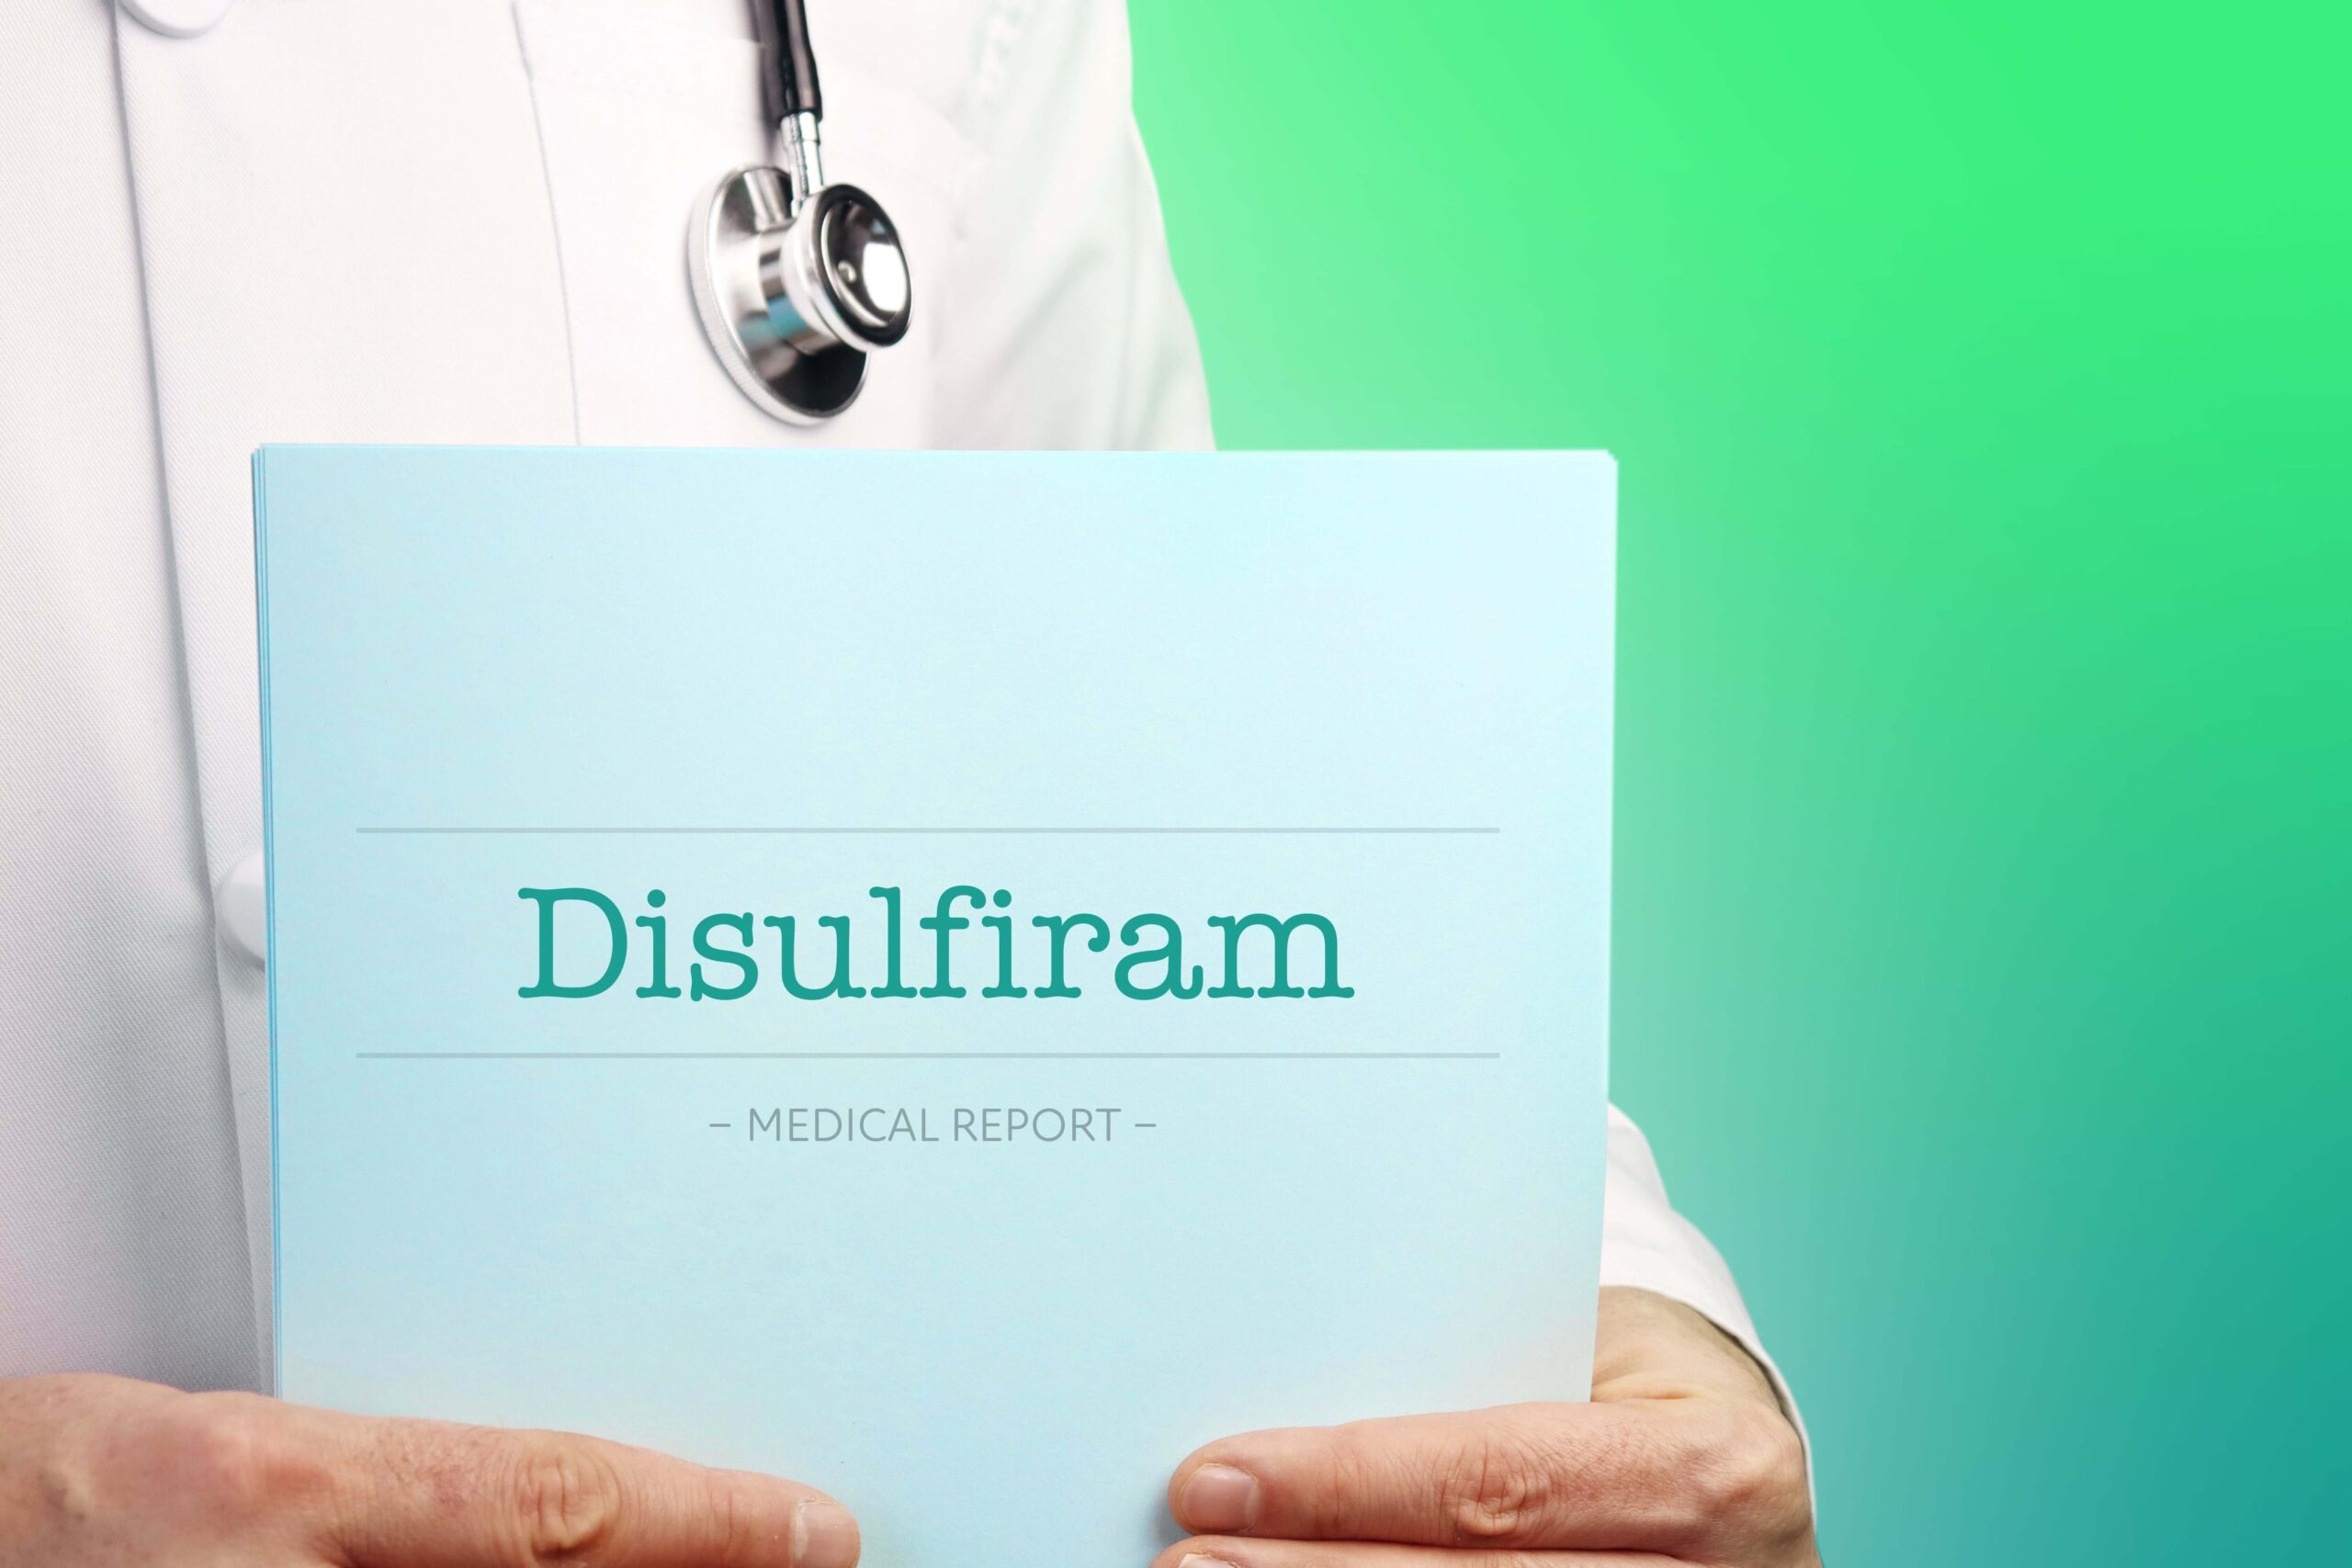 doctor holding a notebook with disulfiram on the cover